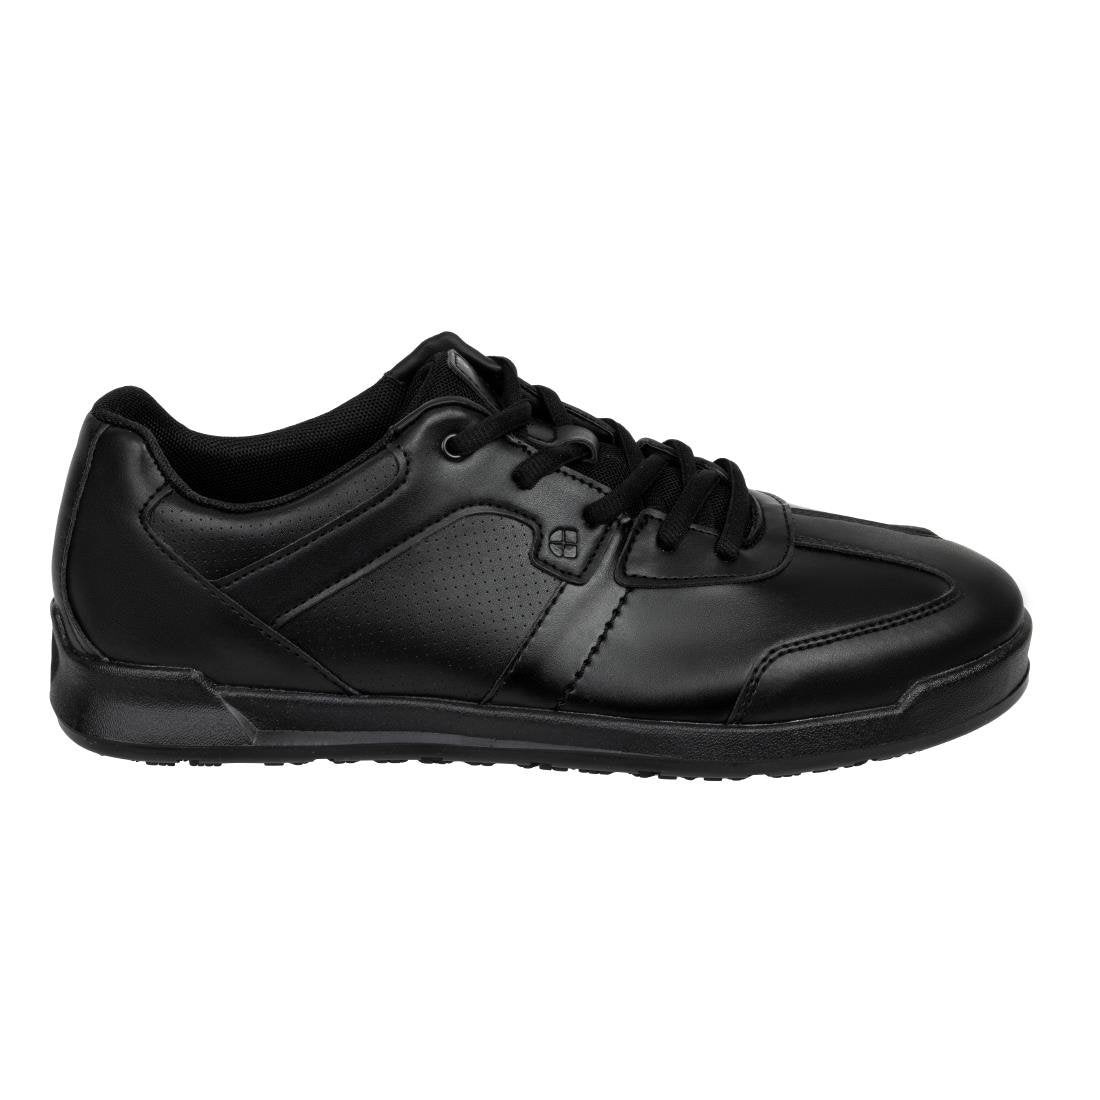 BB585-48 Shoes for Crews Freestyle Trainers Black Size 48